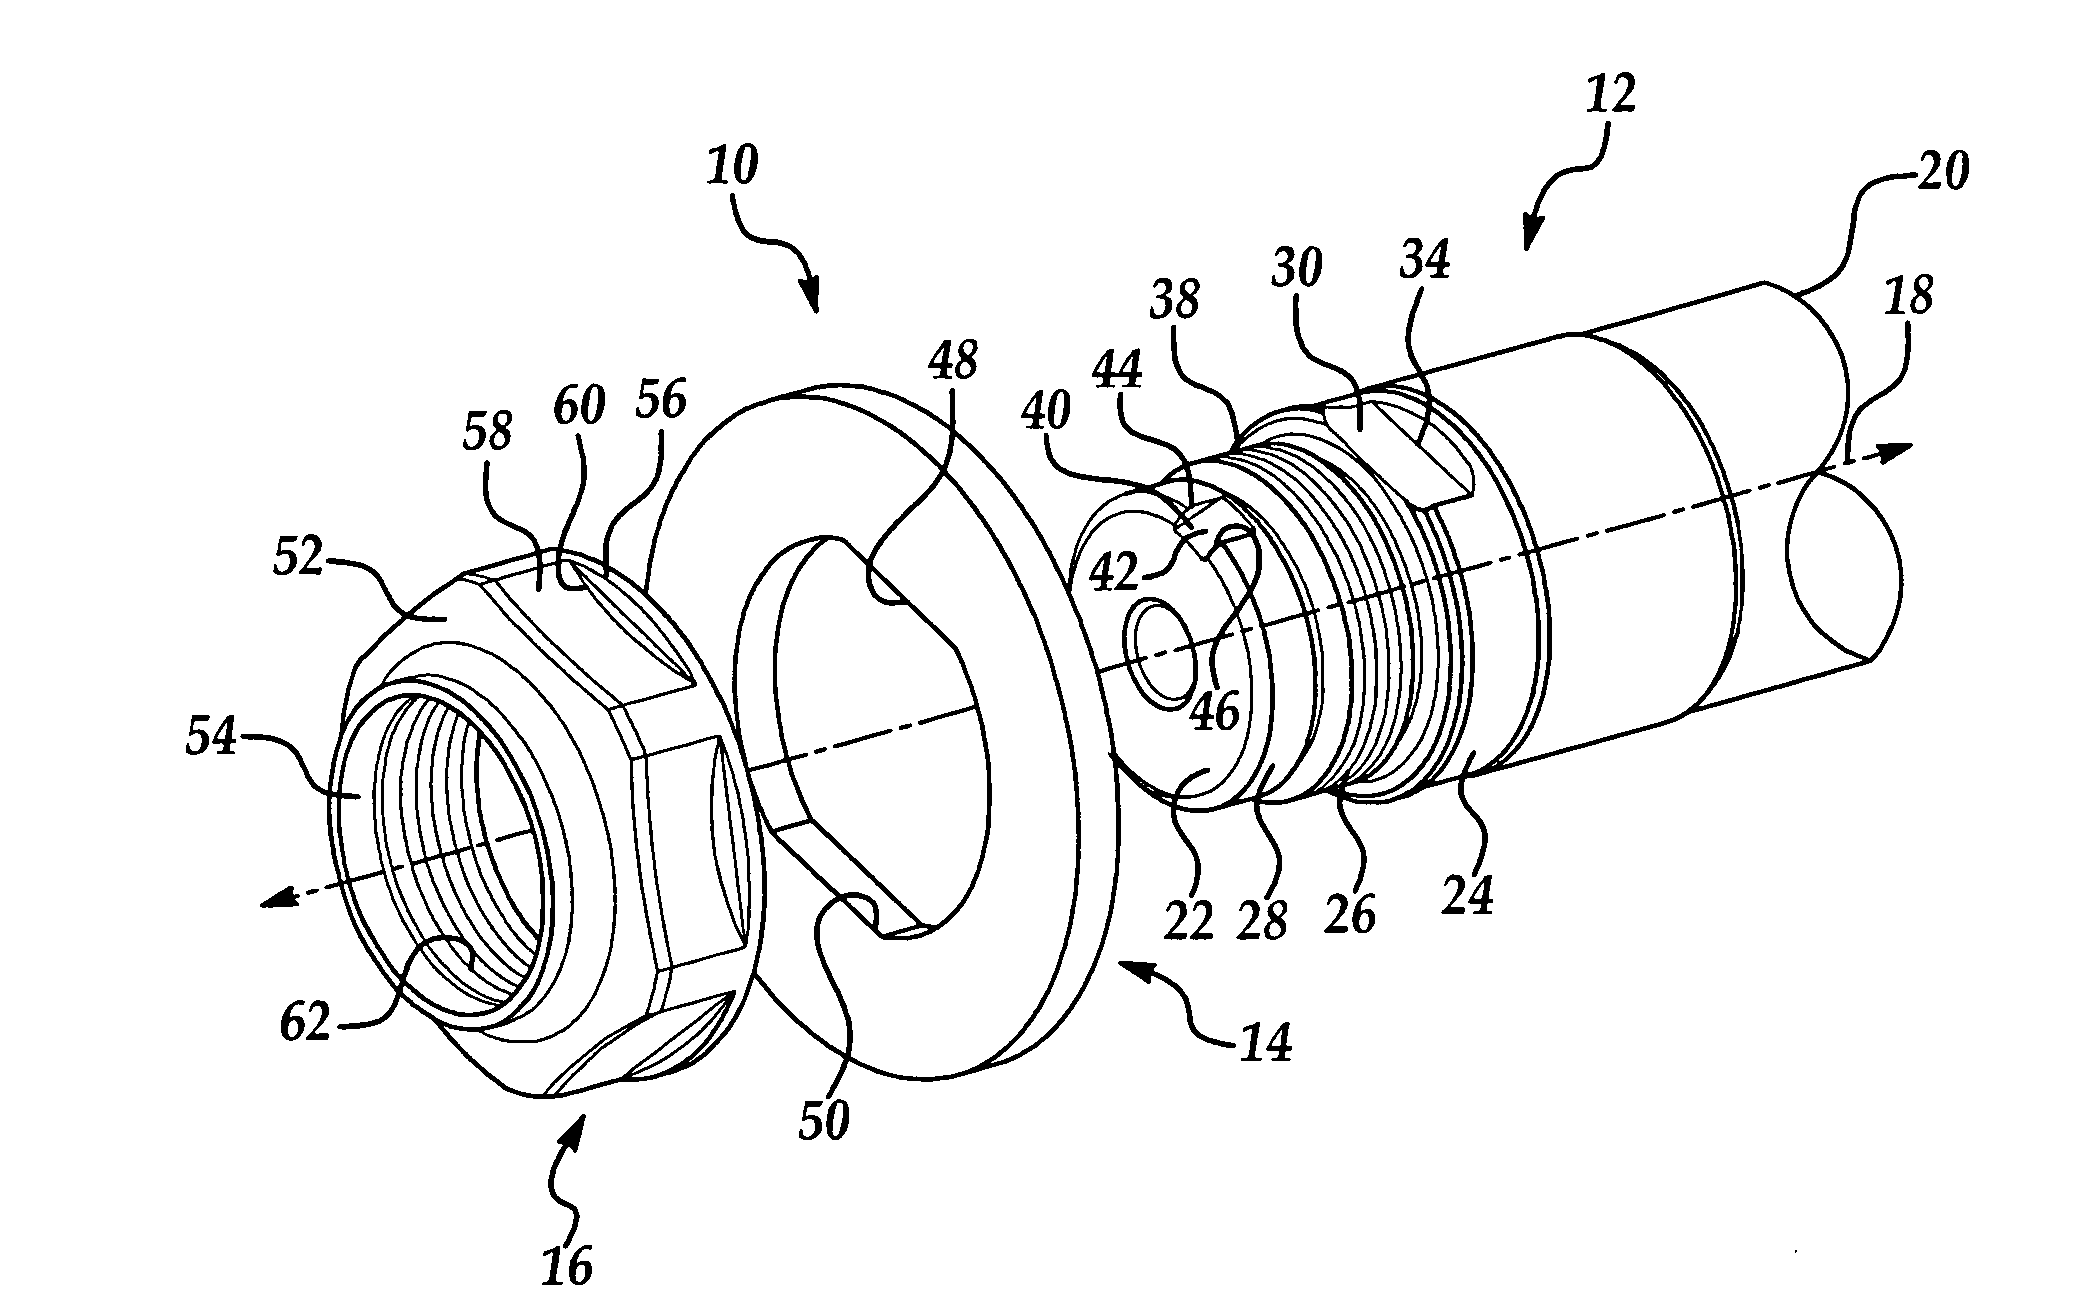 Staked spindle nut system